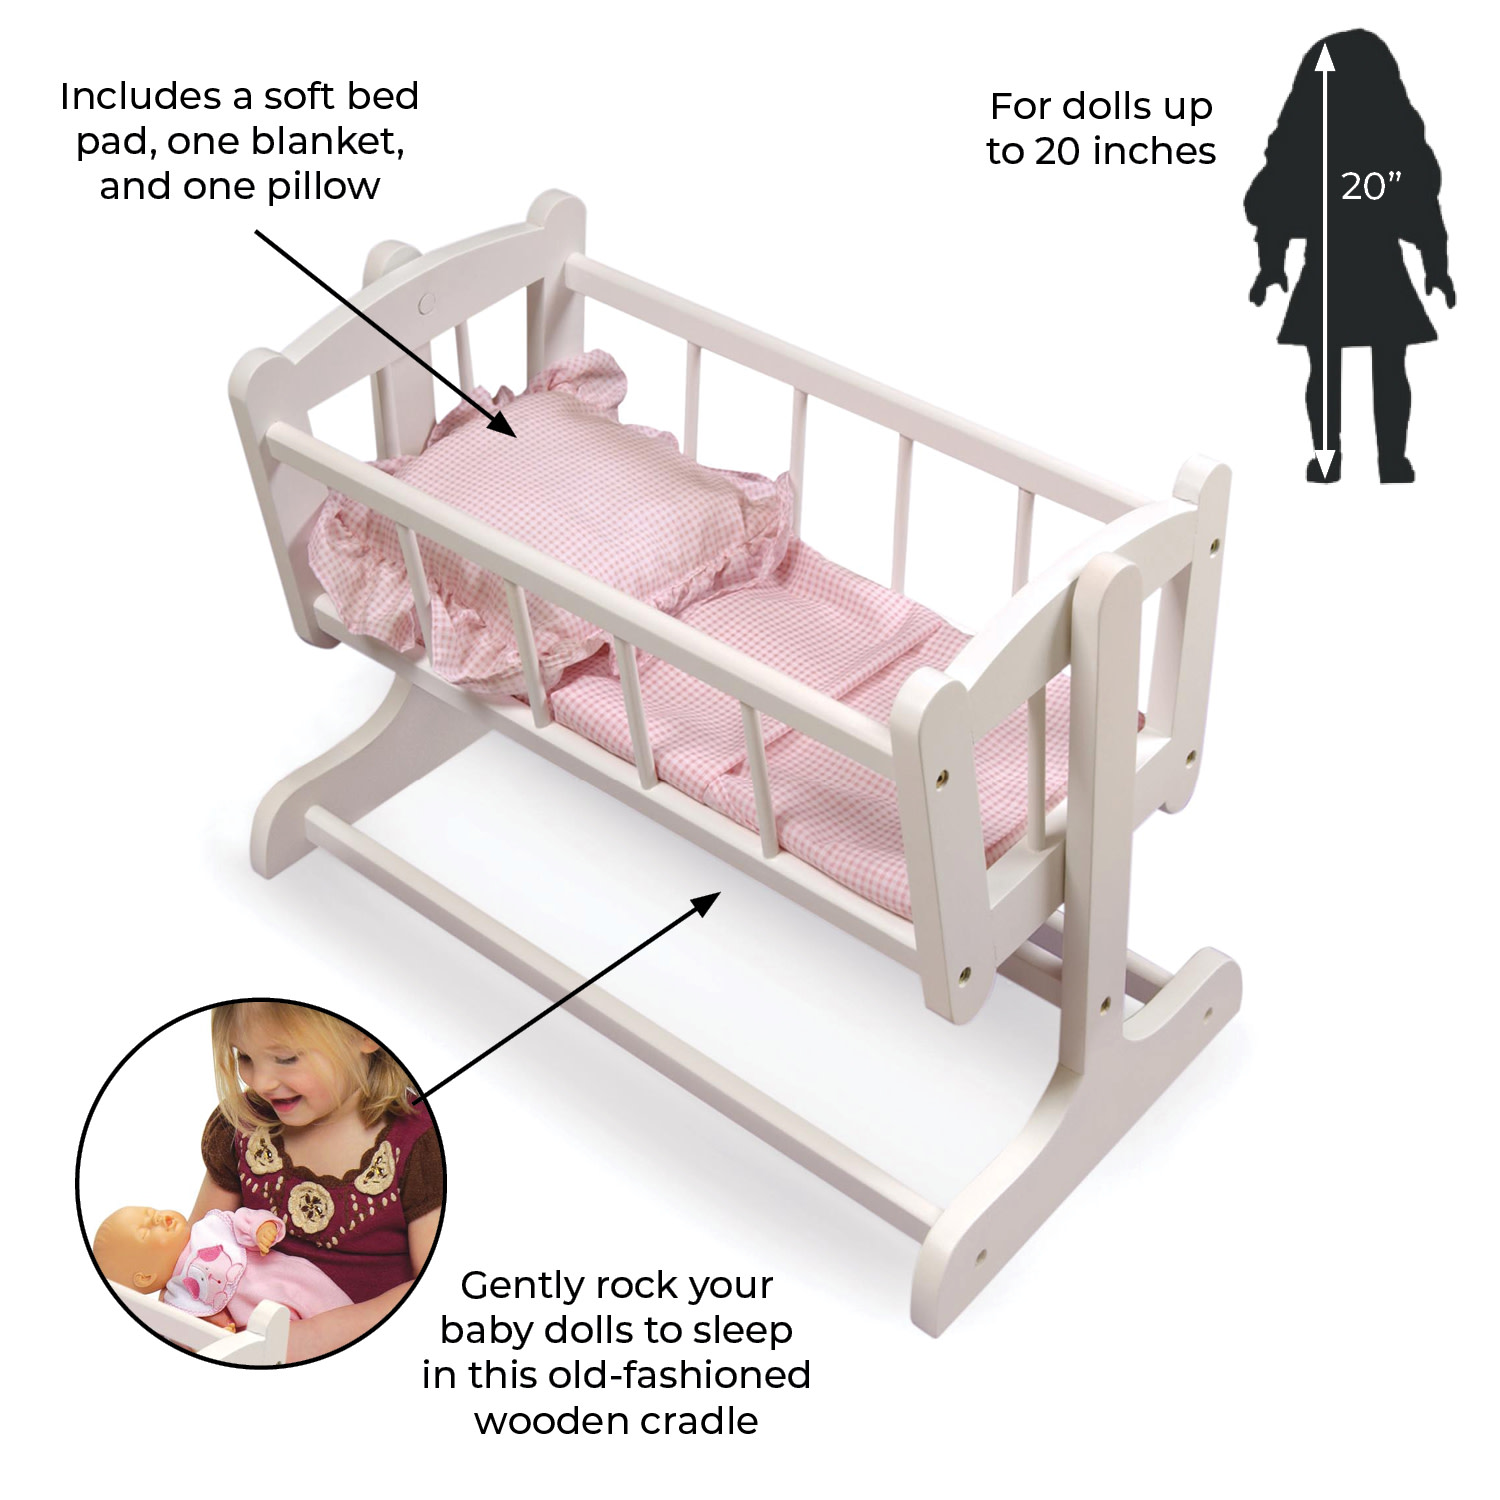 Badger Basket Heirloom Style Doll Cradle with Bedding - White/Pink - image 3 of 8